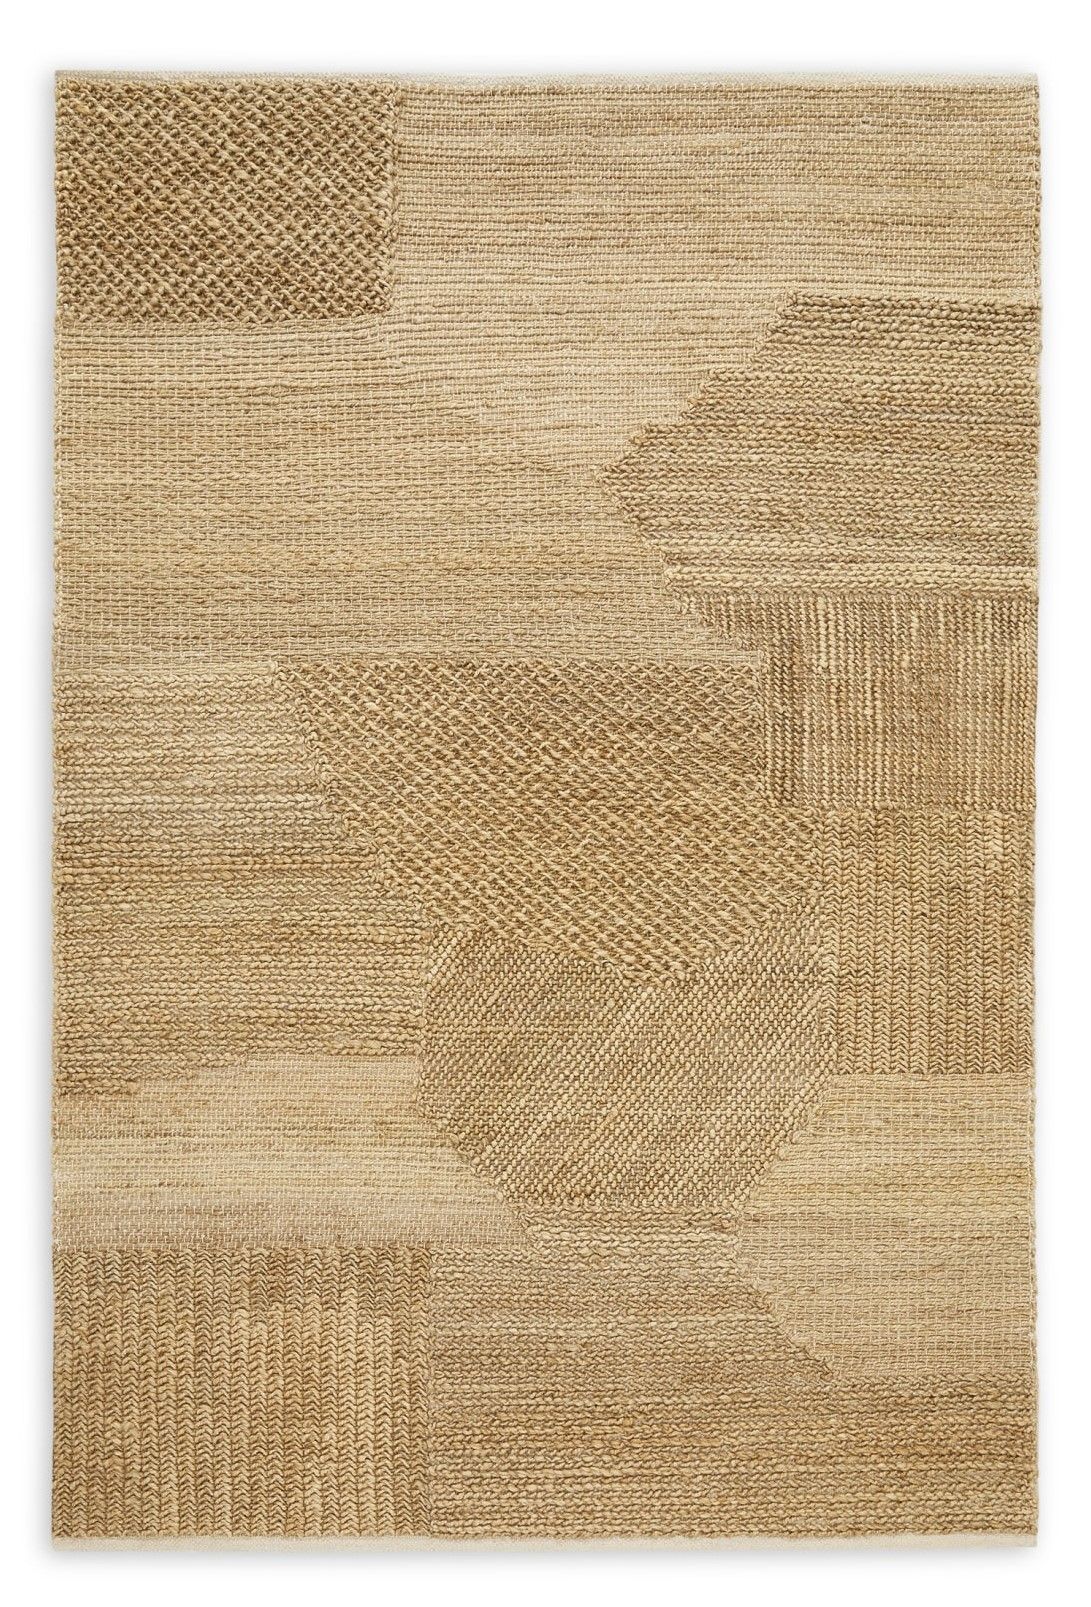 How to pick a rug in modern design